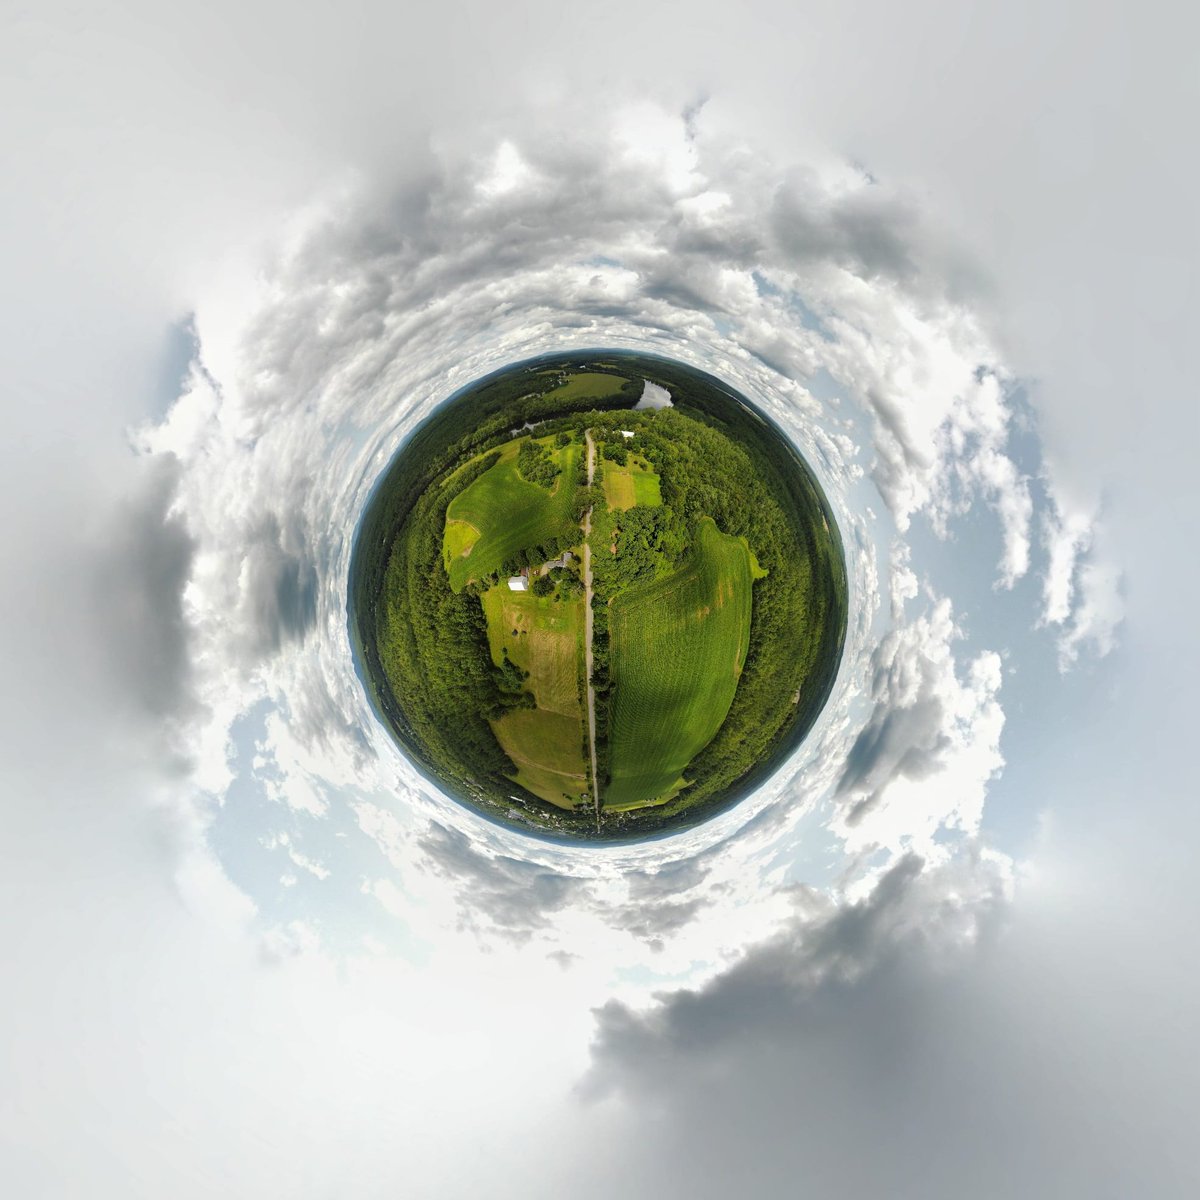 North of Madison, Maine it's a #tinyplanet. #DJI #Mini2 #spherephotography @DroneHour @AirVuz #MEwx #summer #Maine #NewEngland #clouds